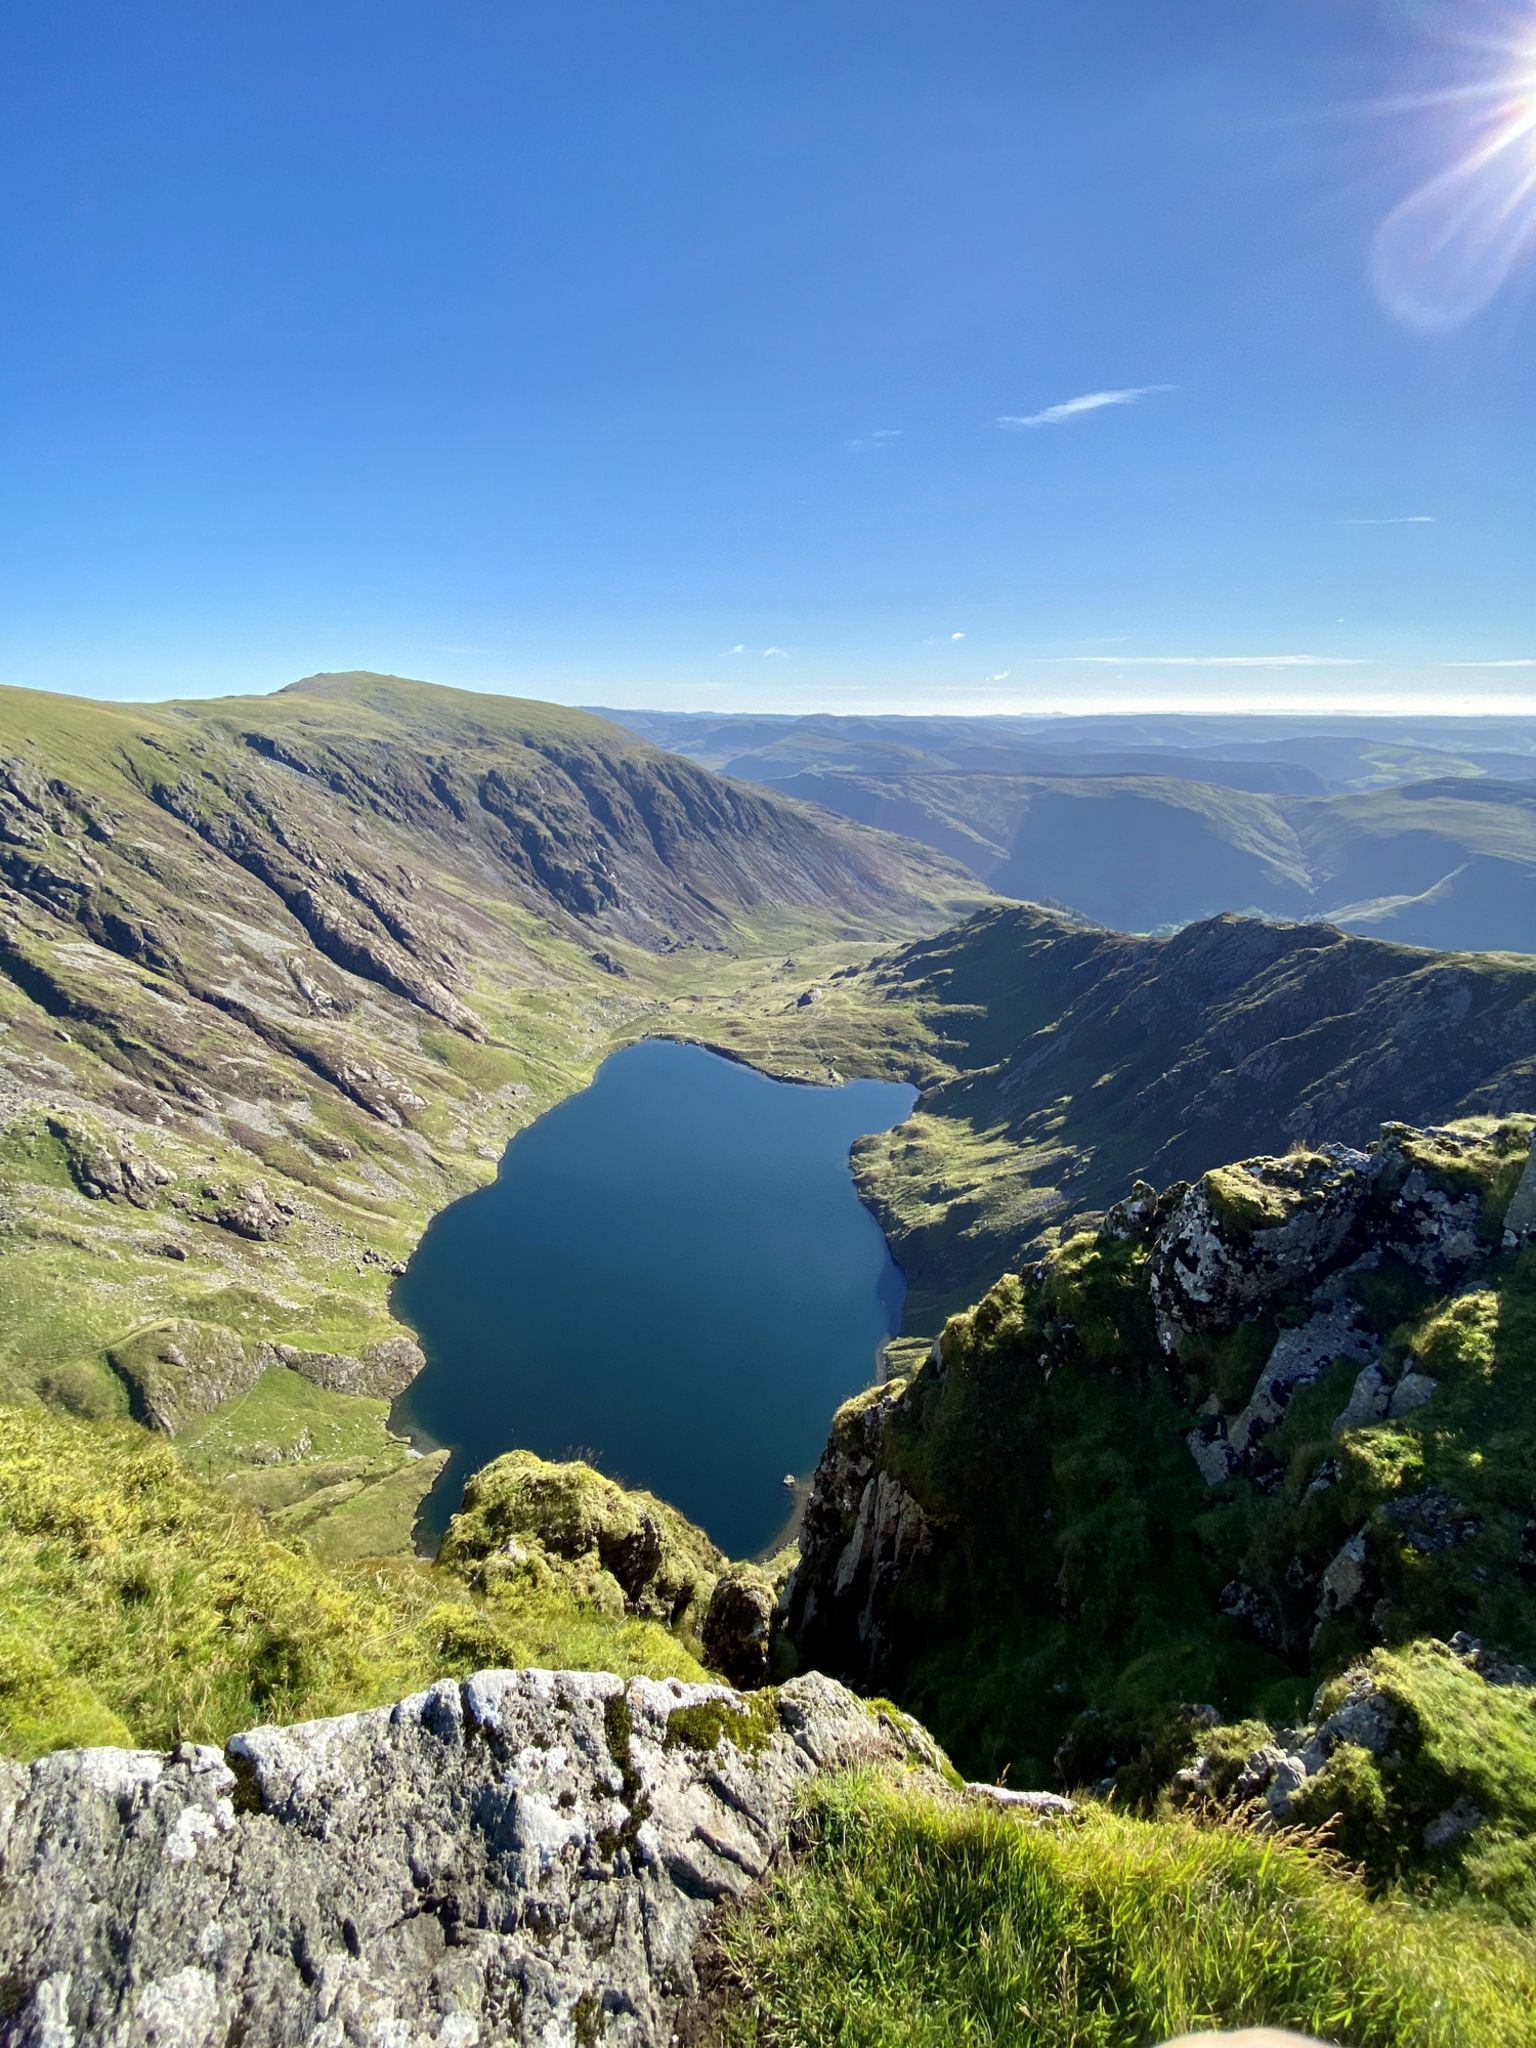 Cadair Idris mountain in North Wales, part of Snowdonia National Park and close to the Mach Loop - stock photo